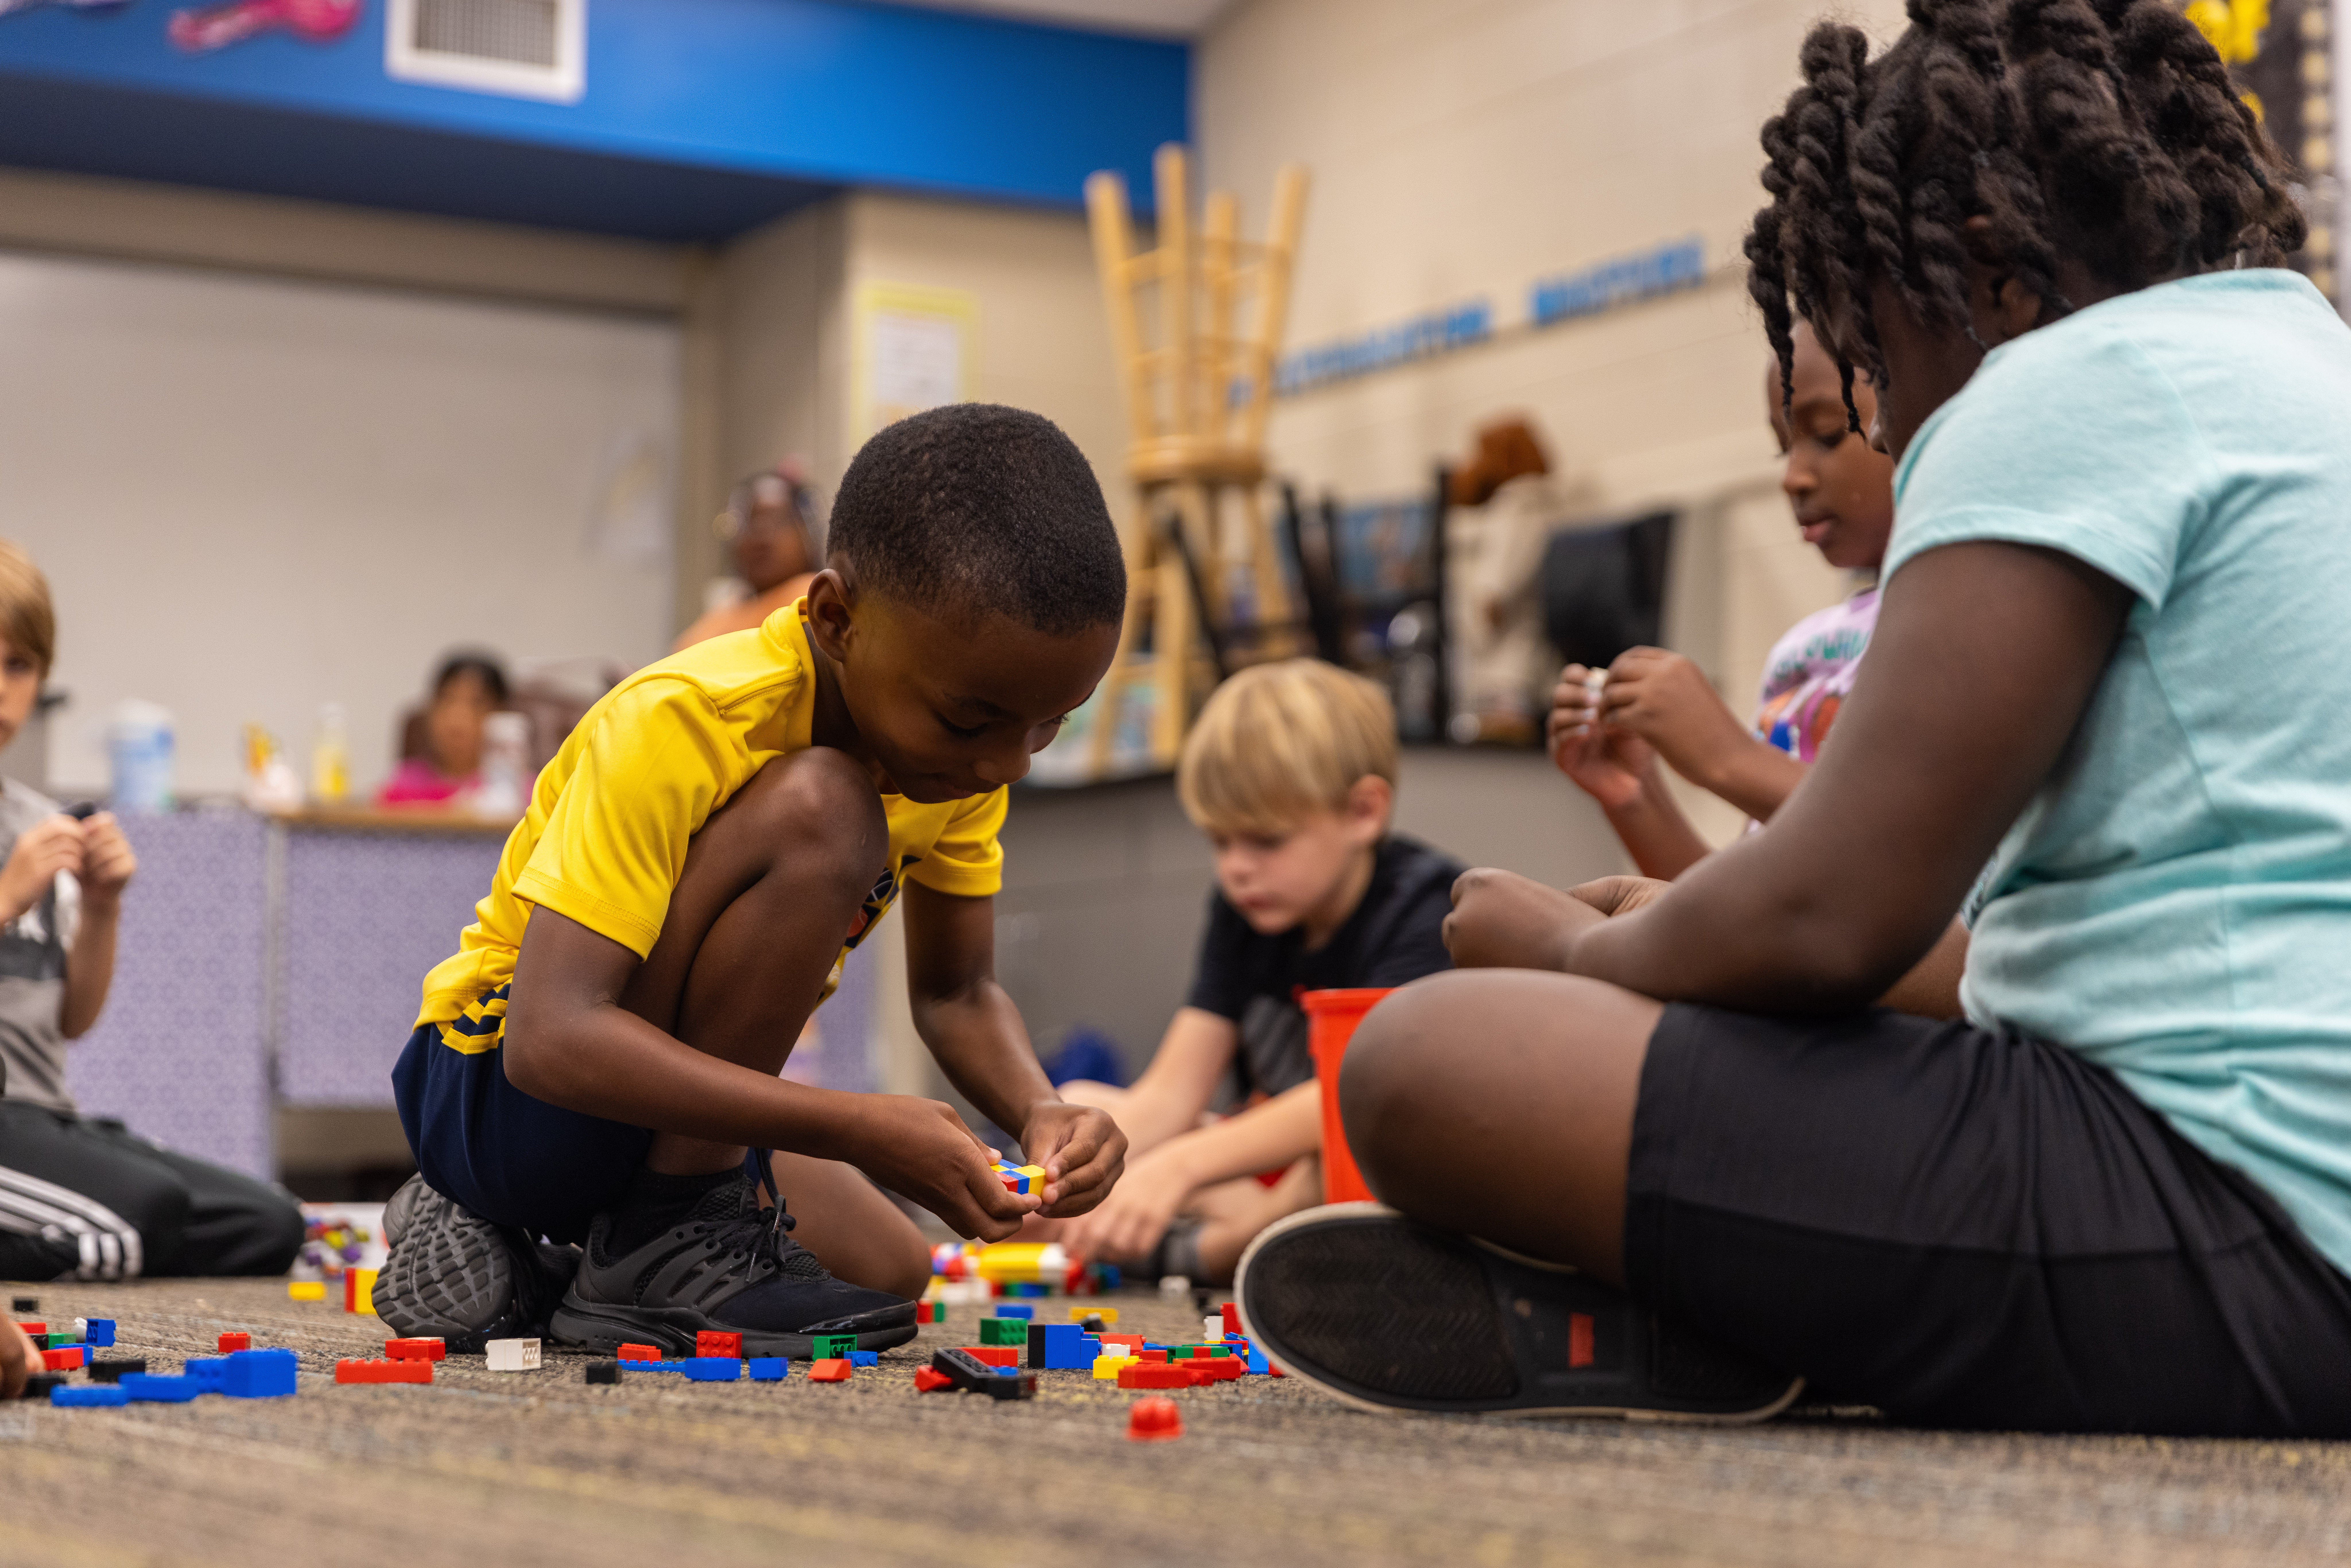 Children play with blocks during a summer program.